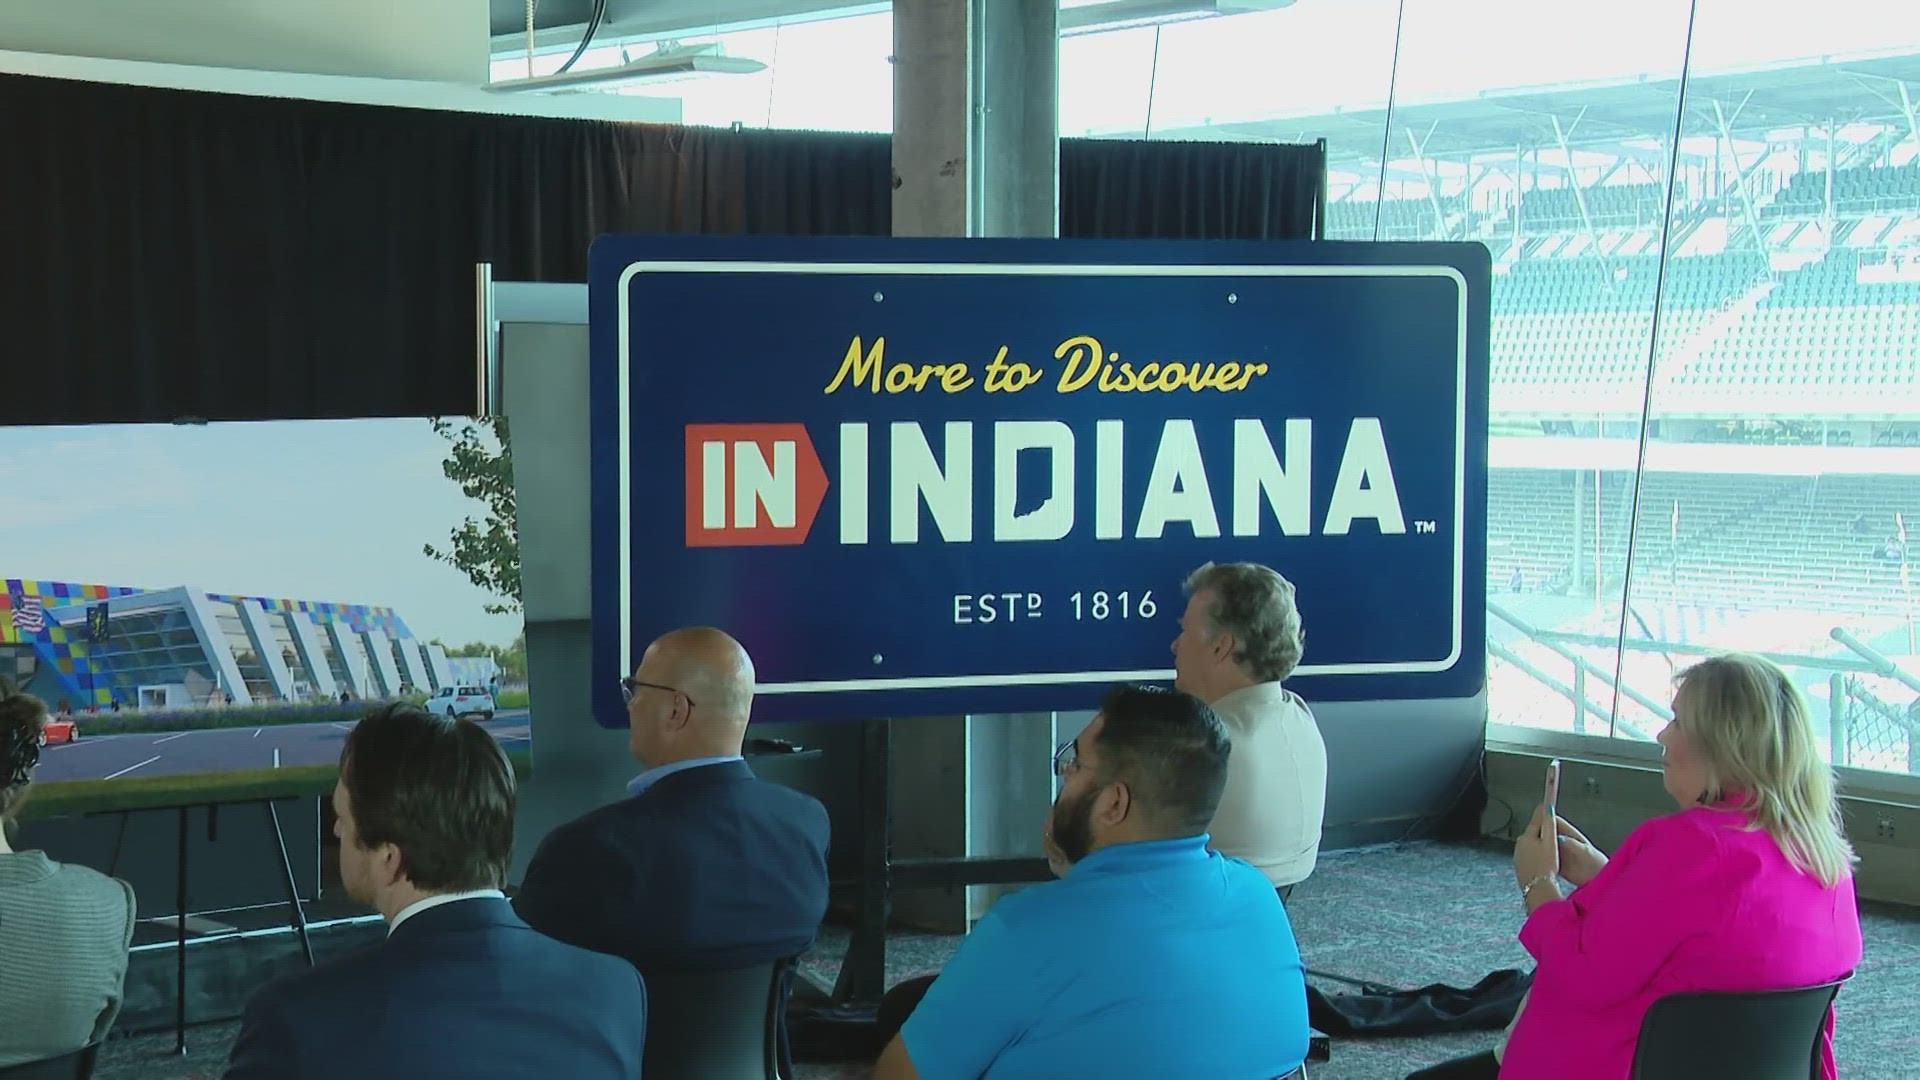 A brand new way to welcome people when they cross the Indiana state line.